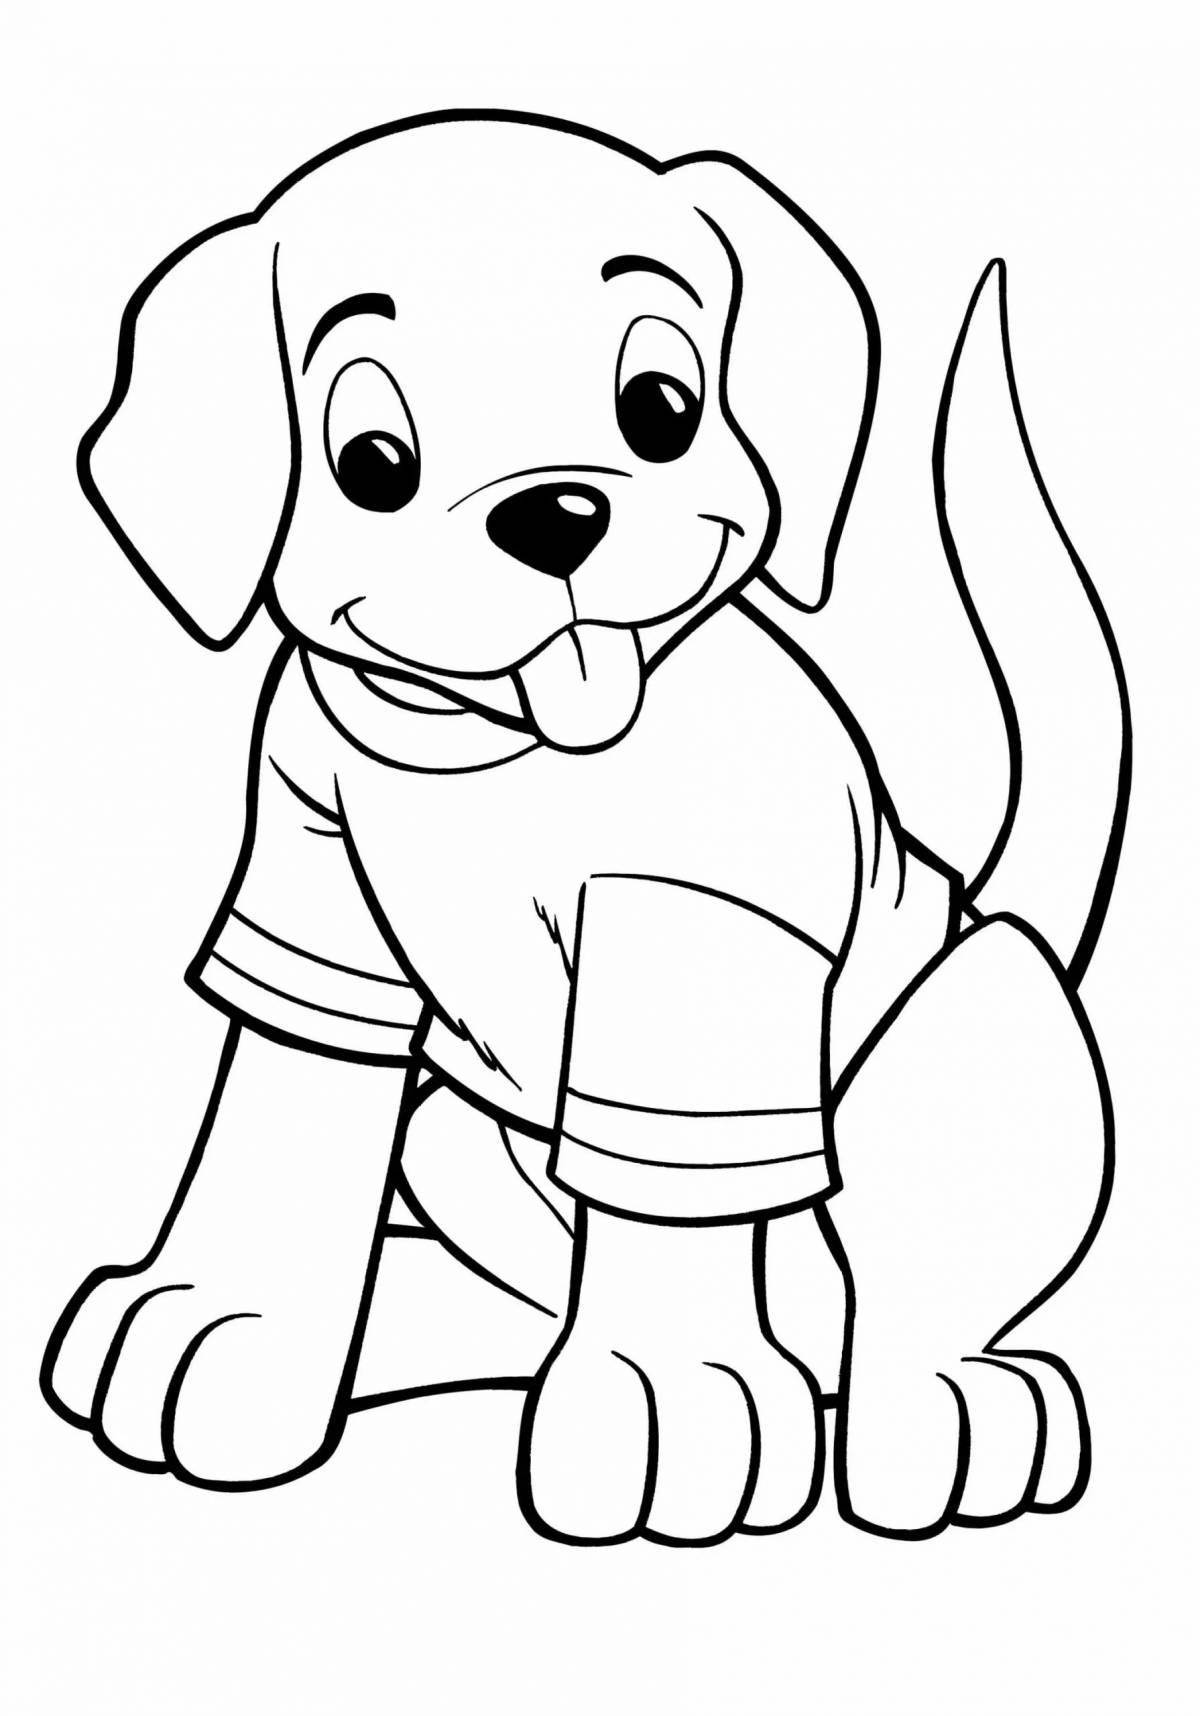 Live dog coloring book for kids